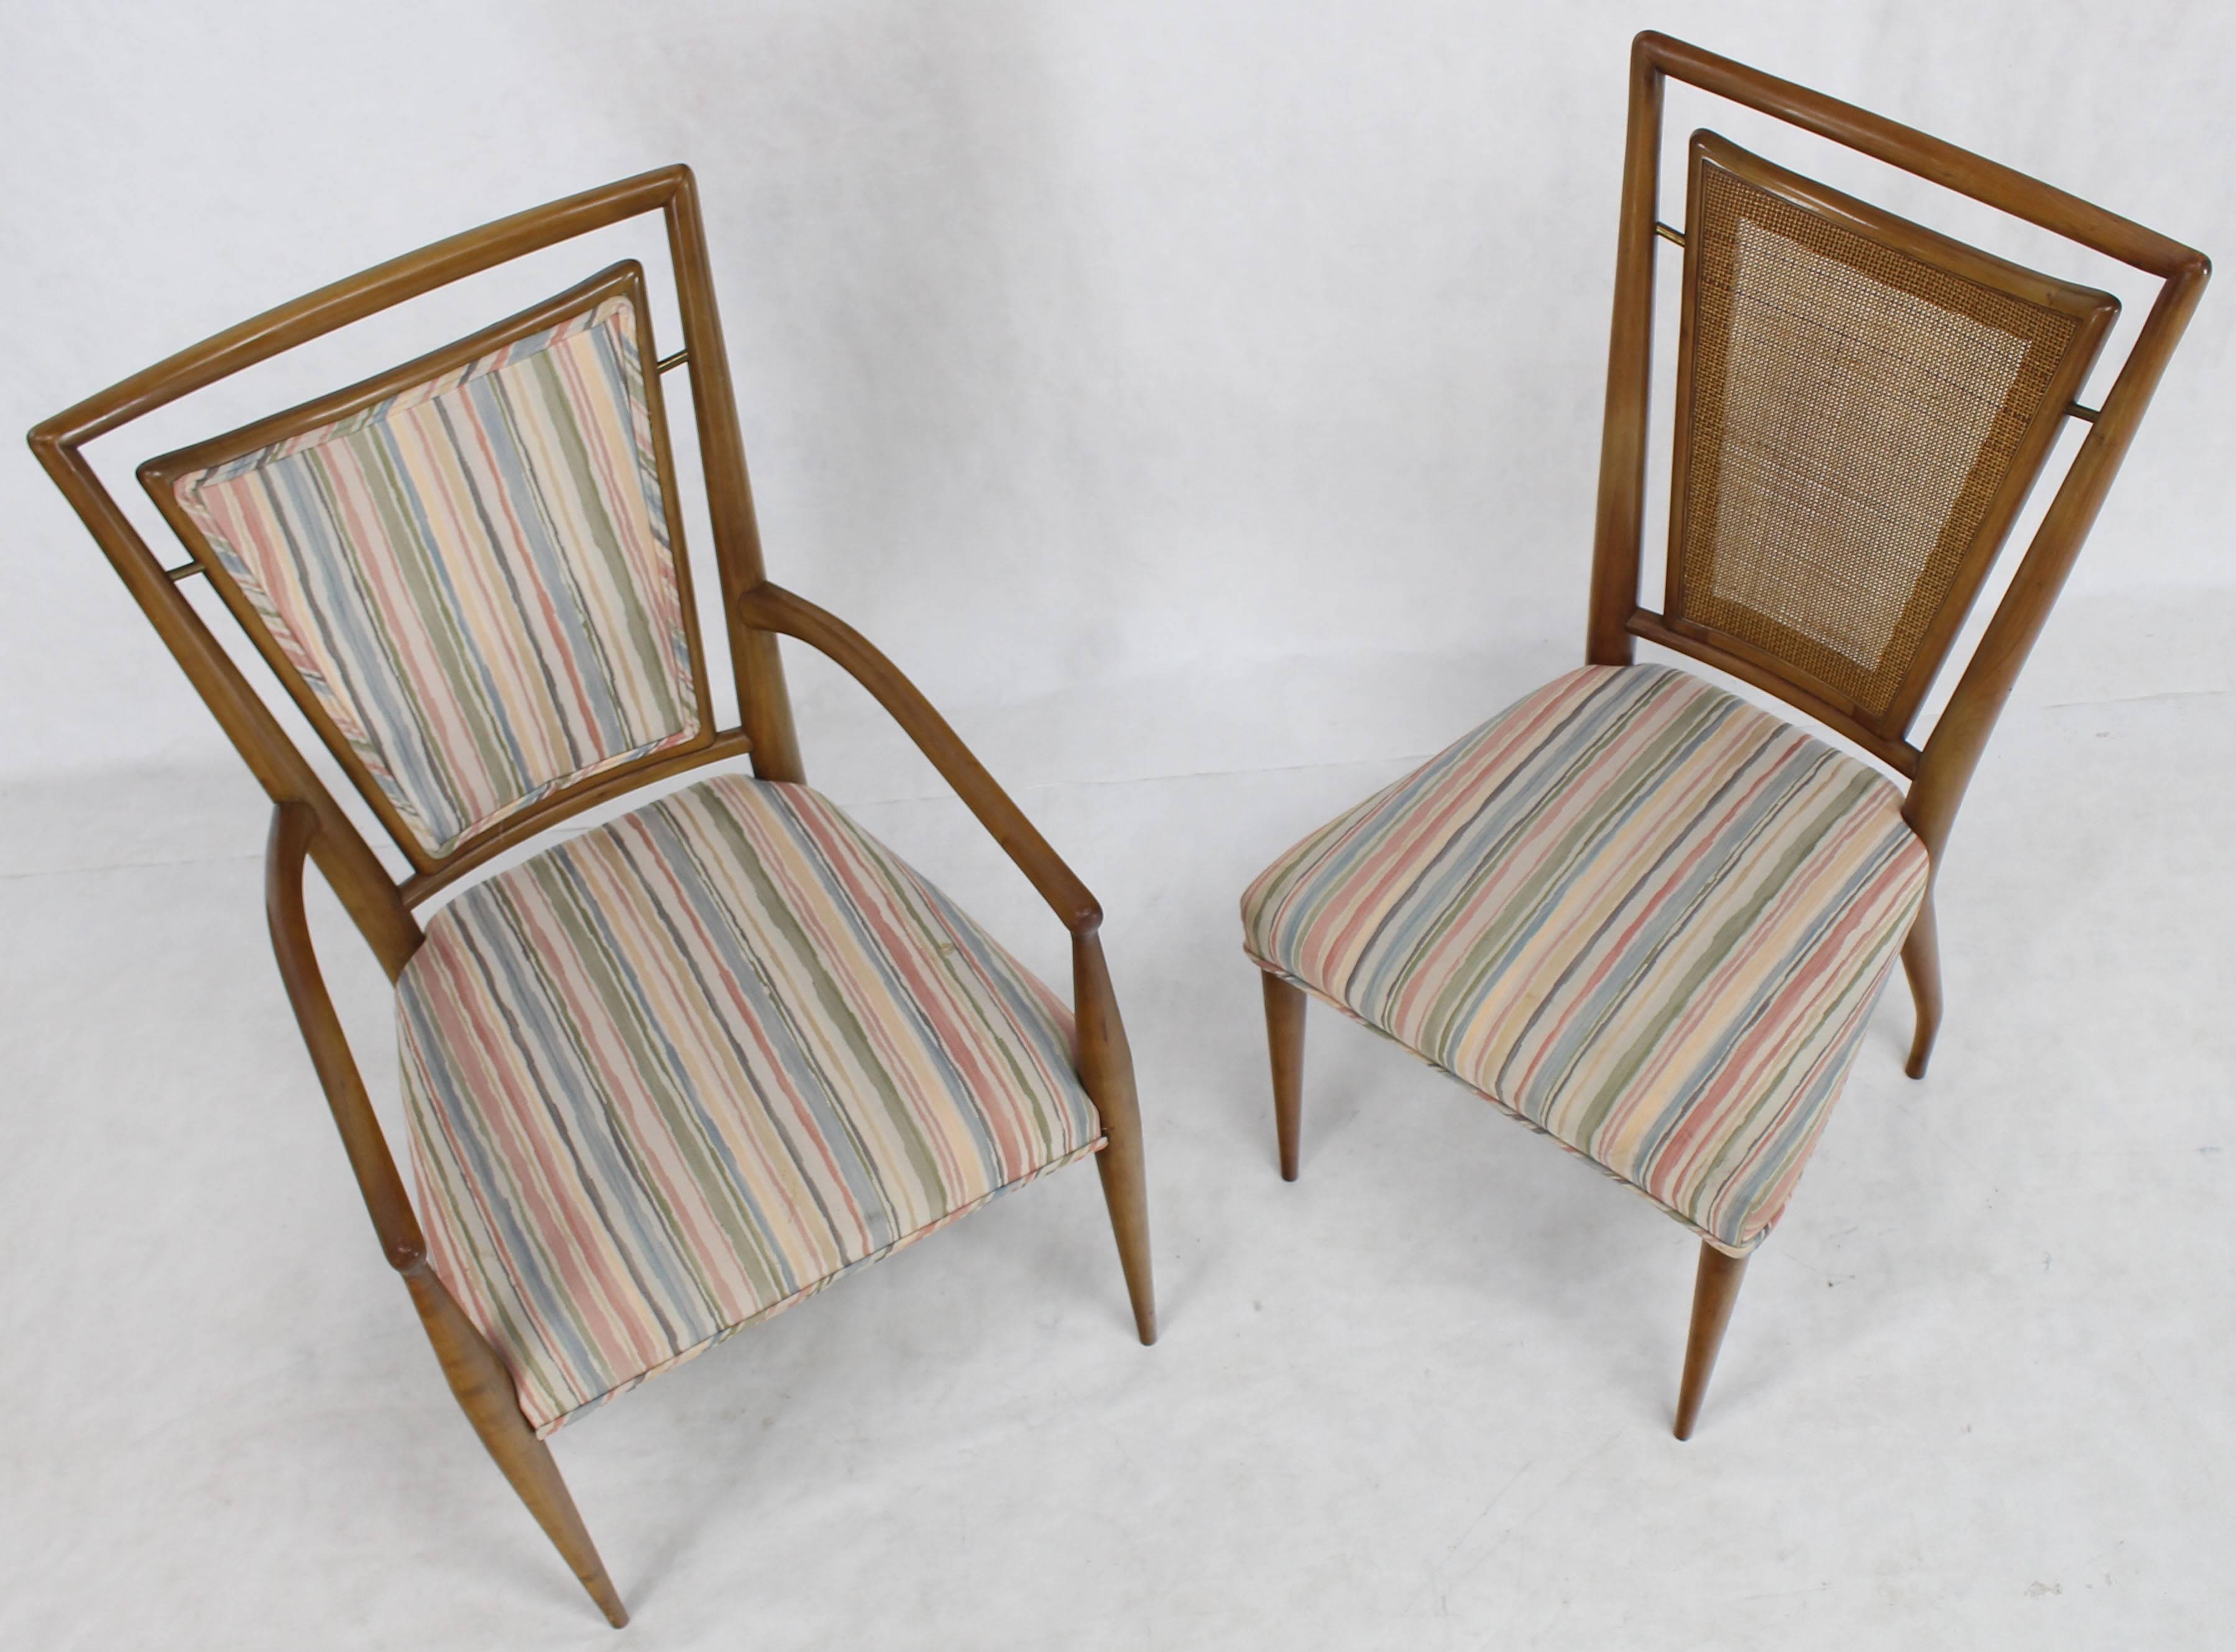 20th Century Set of Six Mid-Century Modern Walnut Dining Chairs by Widdicomb in Ponti Style For Sale